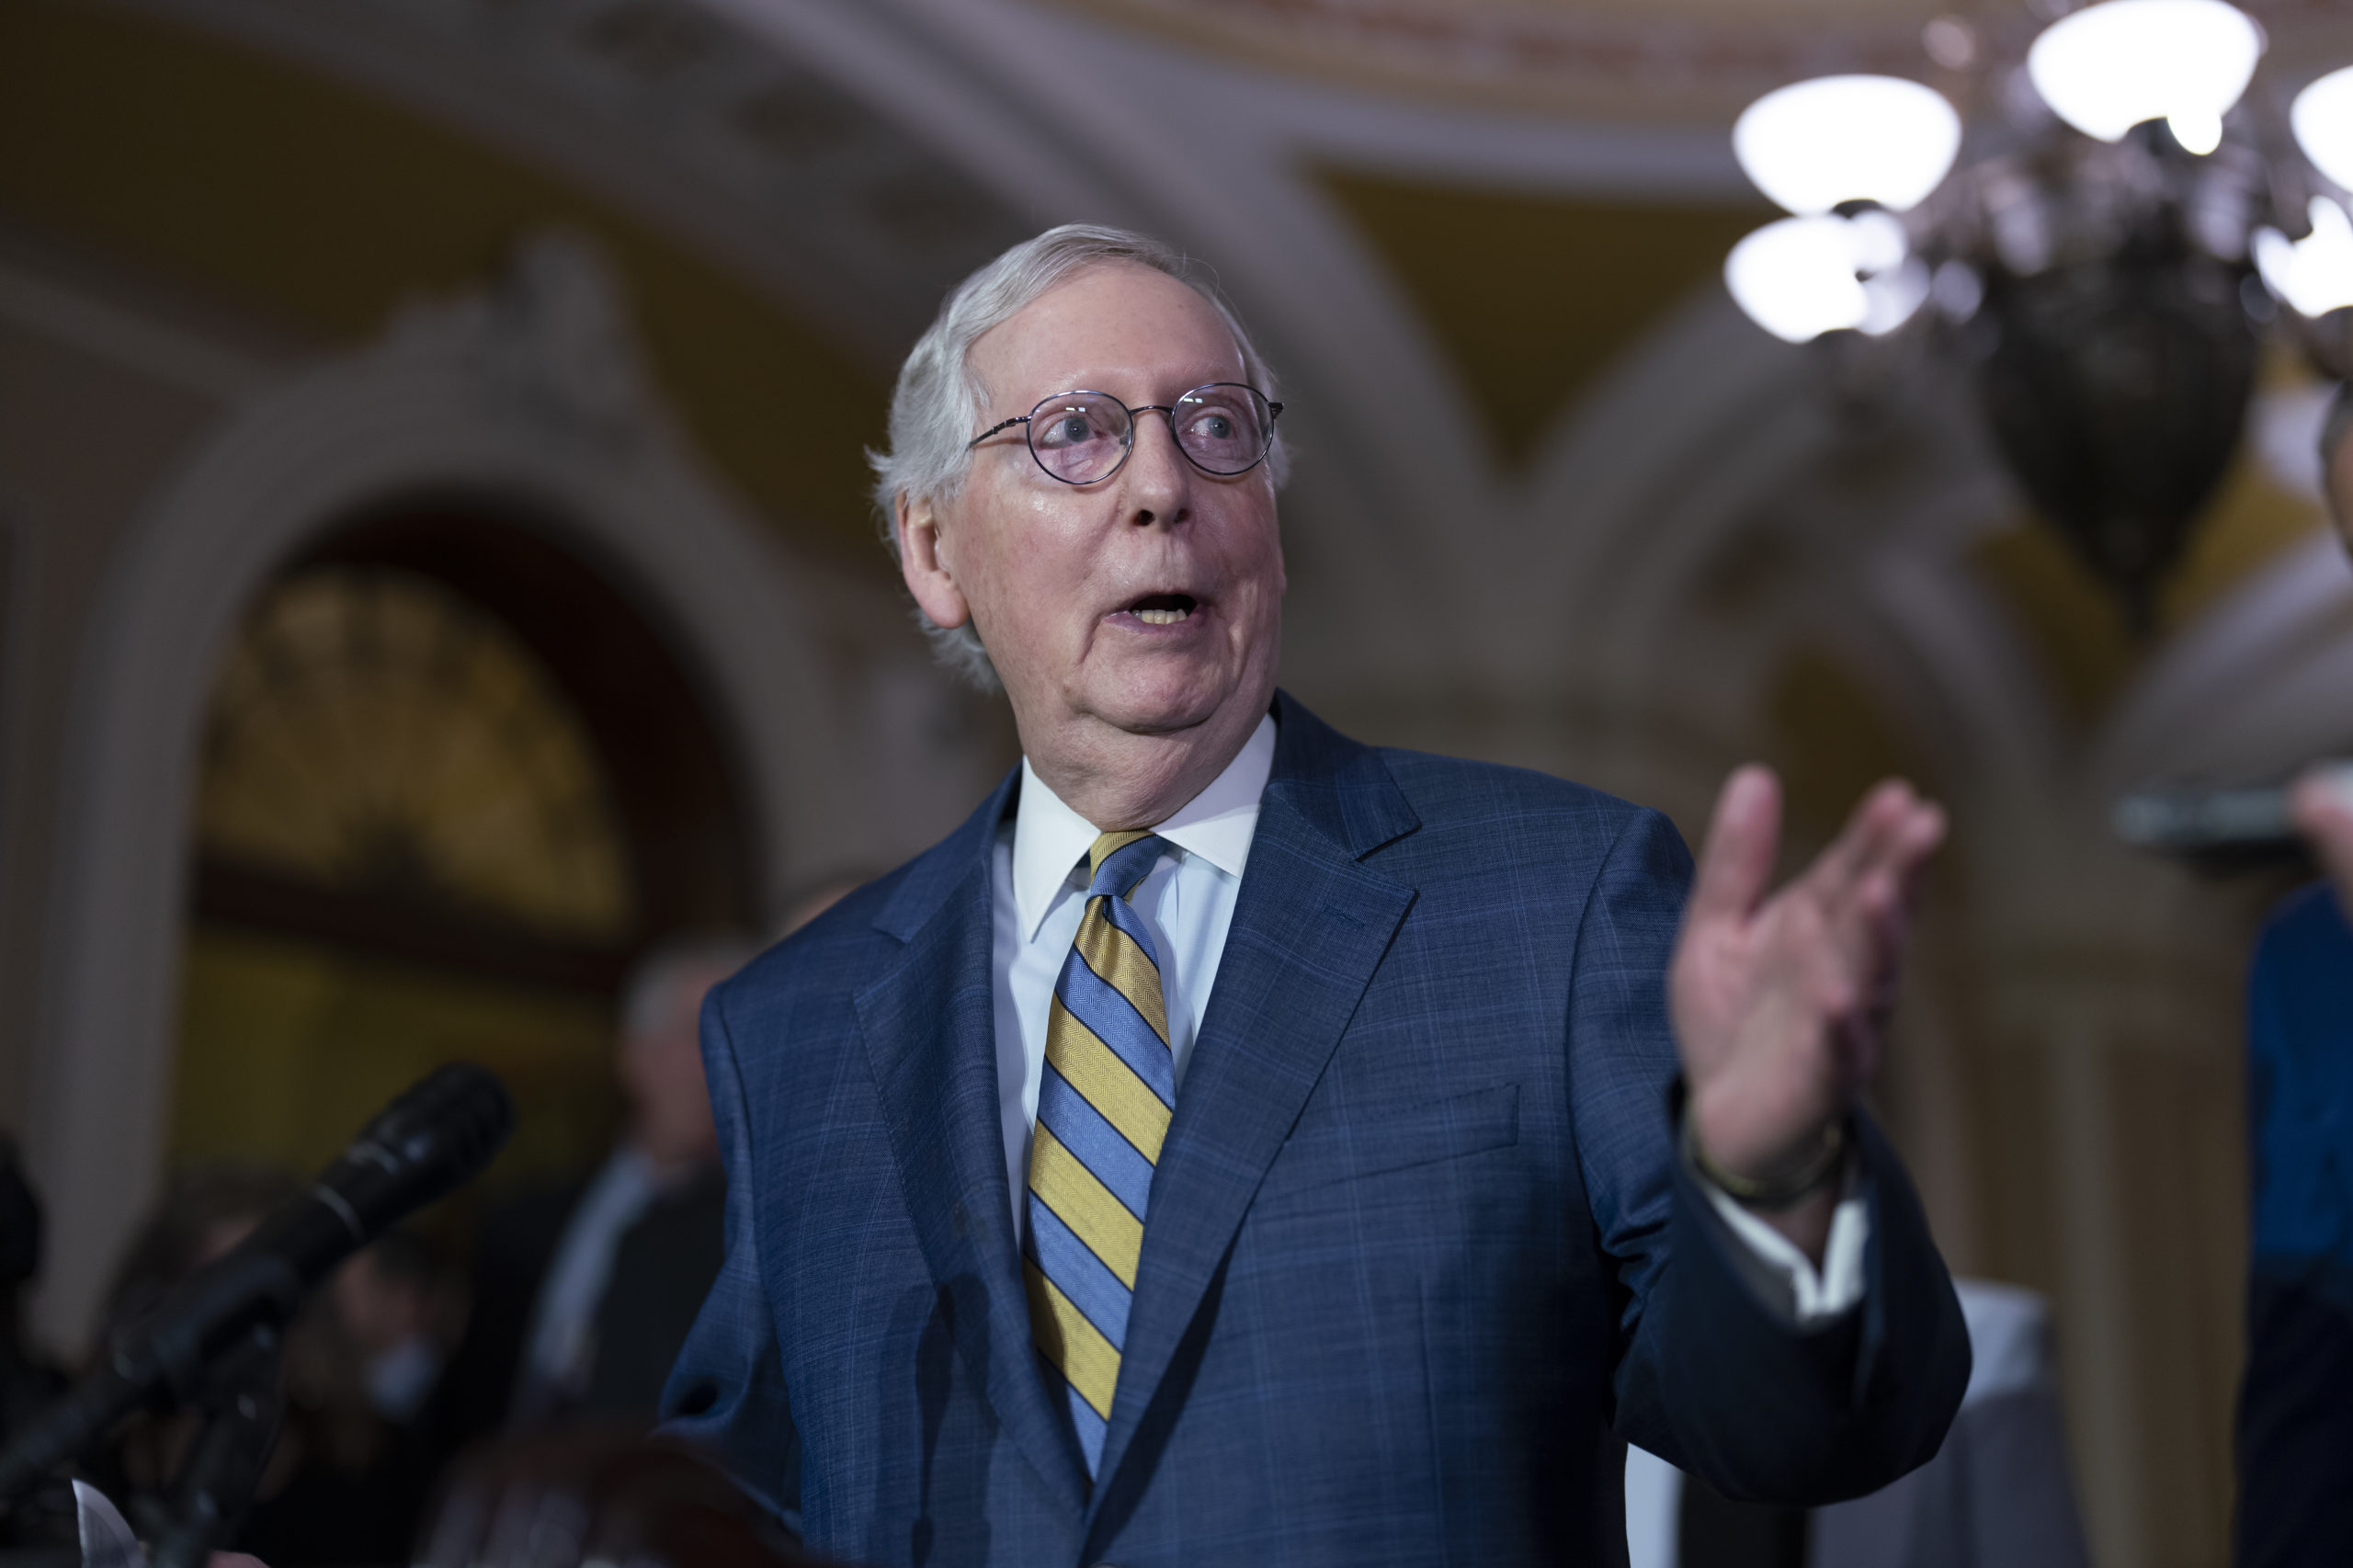 Senate Minority Leader Mitch McConnell of Kentucky, pictured at a news conference in a March 7 file photo.